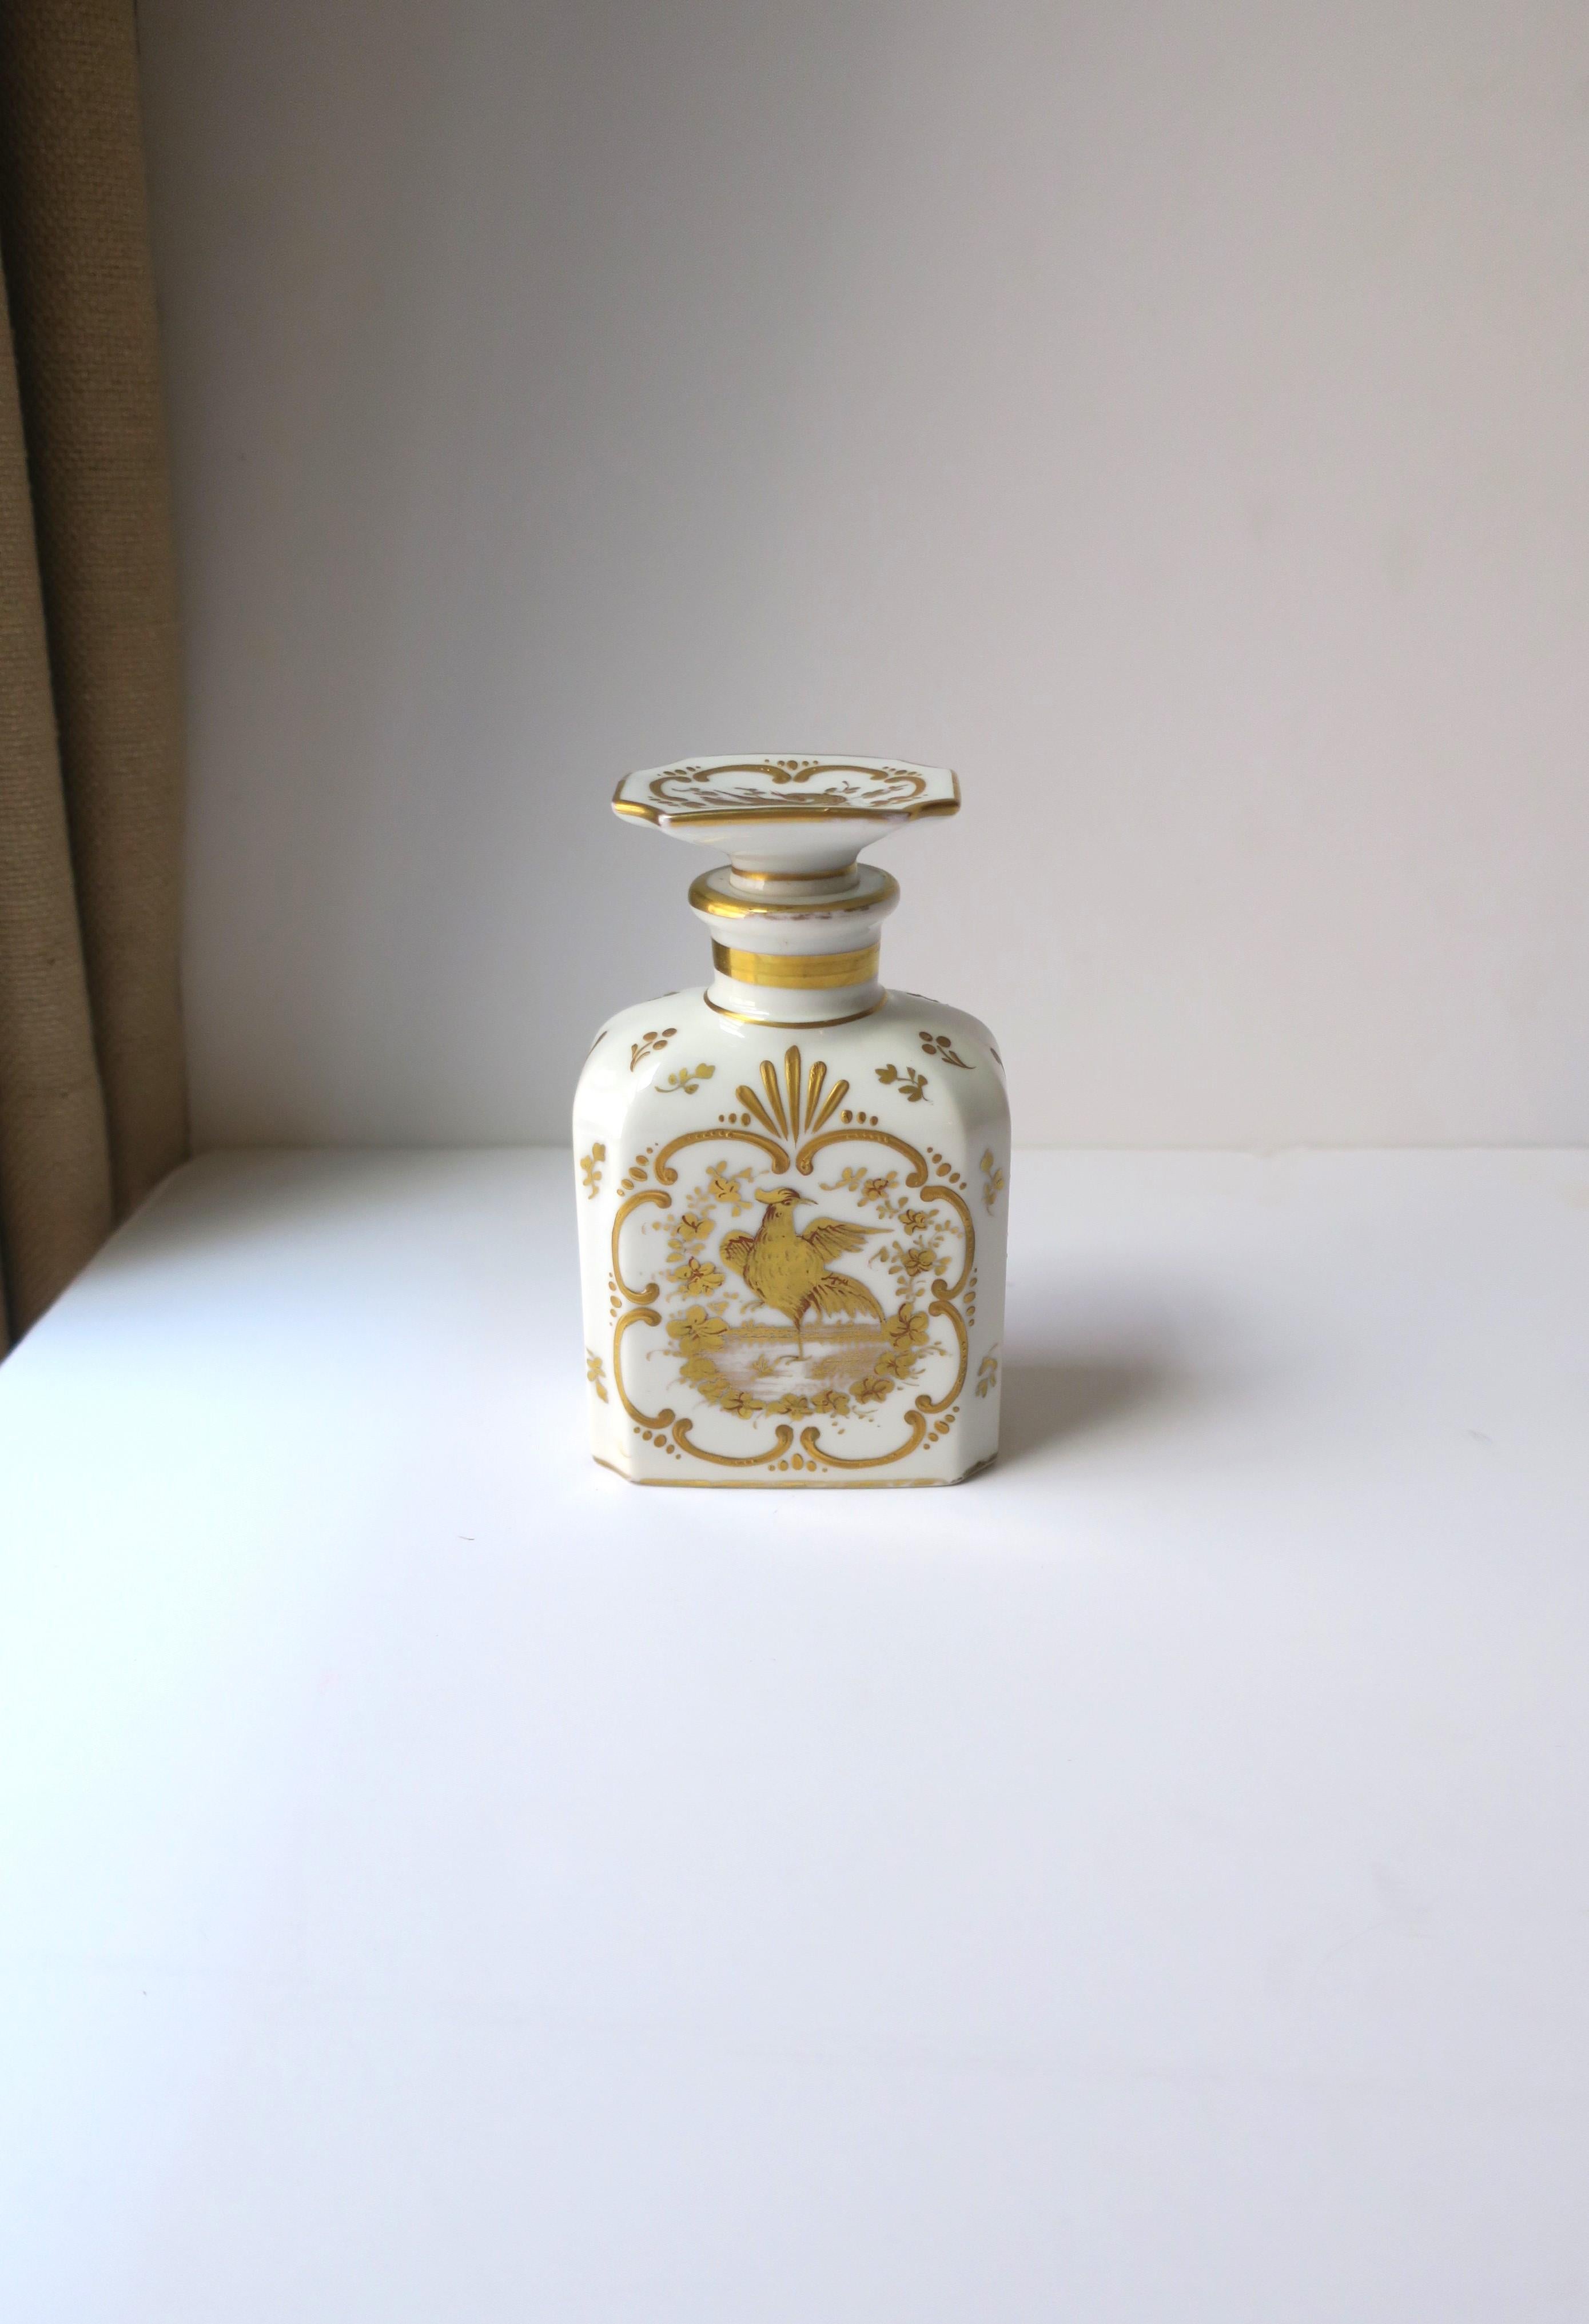 A very beautiful Italian white and gold porcelain vanity bottle with bird design in the Rococo style, circa early-20th century, Italy. A white porcelain bottle and stopper top with raised gold gilt relief, including a bird on front, back and on top